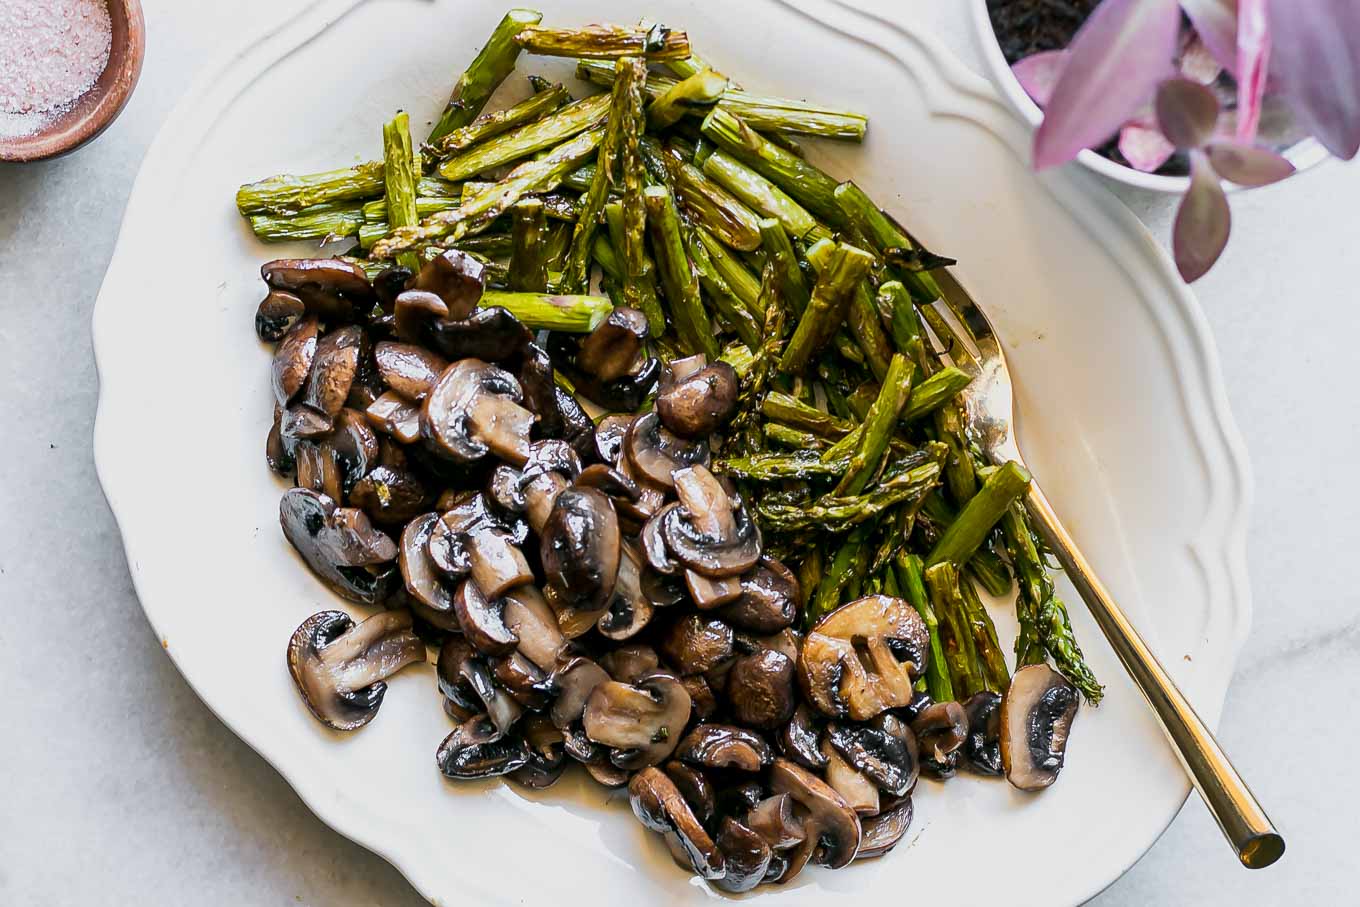 cut mushrooms and asparagus on a white plate with a gold fork